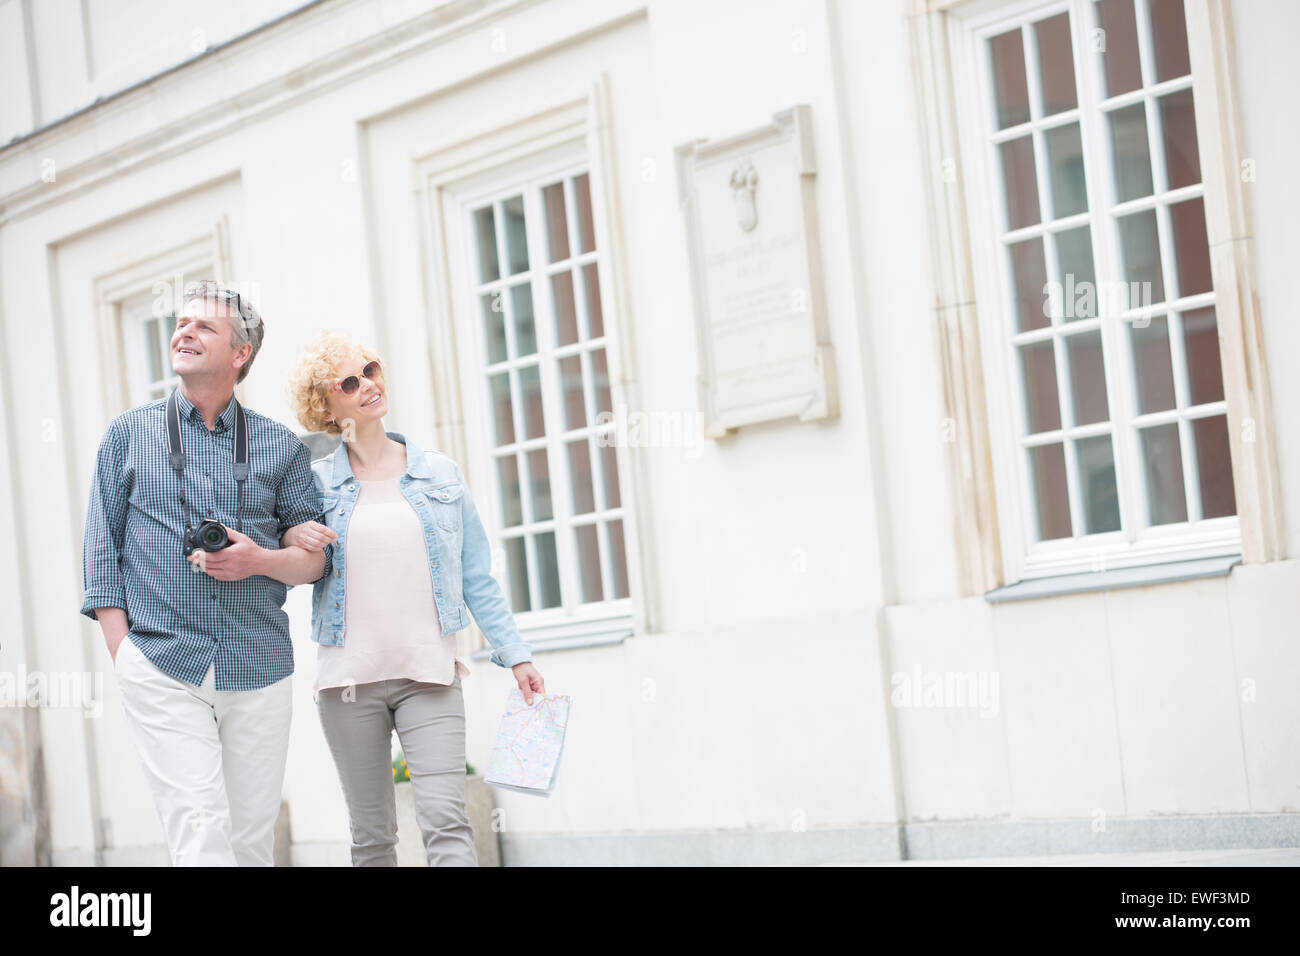 Happy middle-aged tourist couple walking arm in arm by building Stock Photo